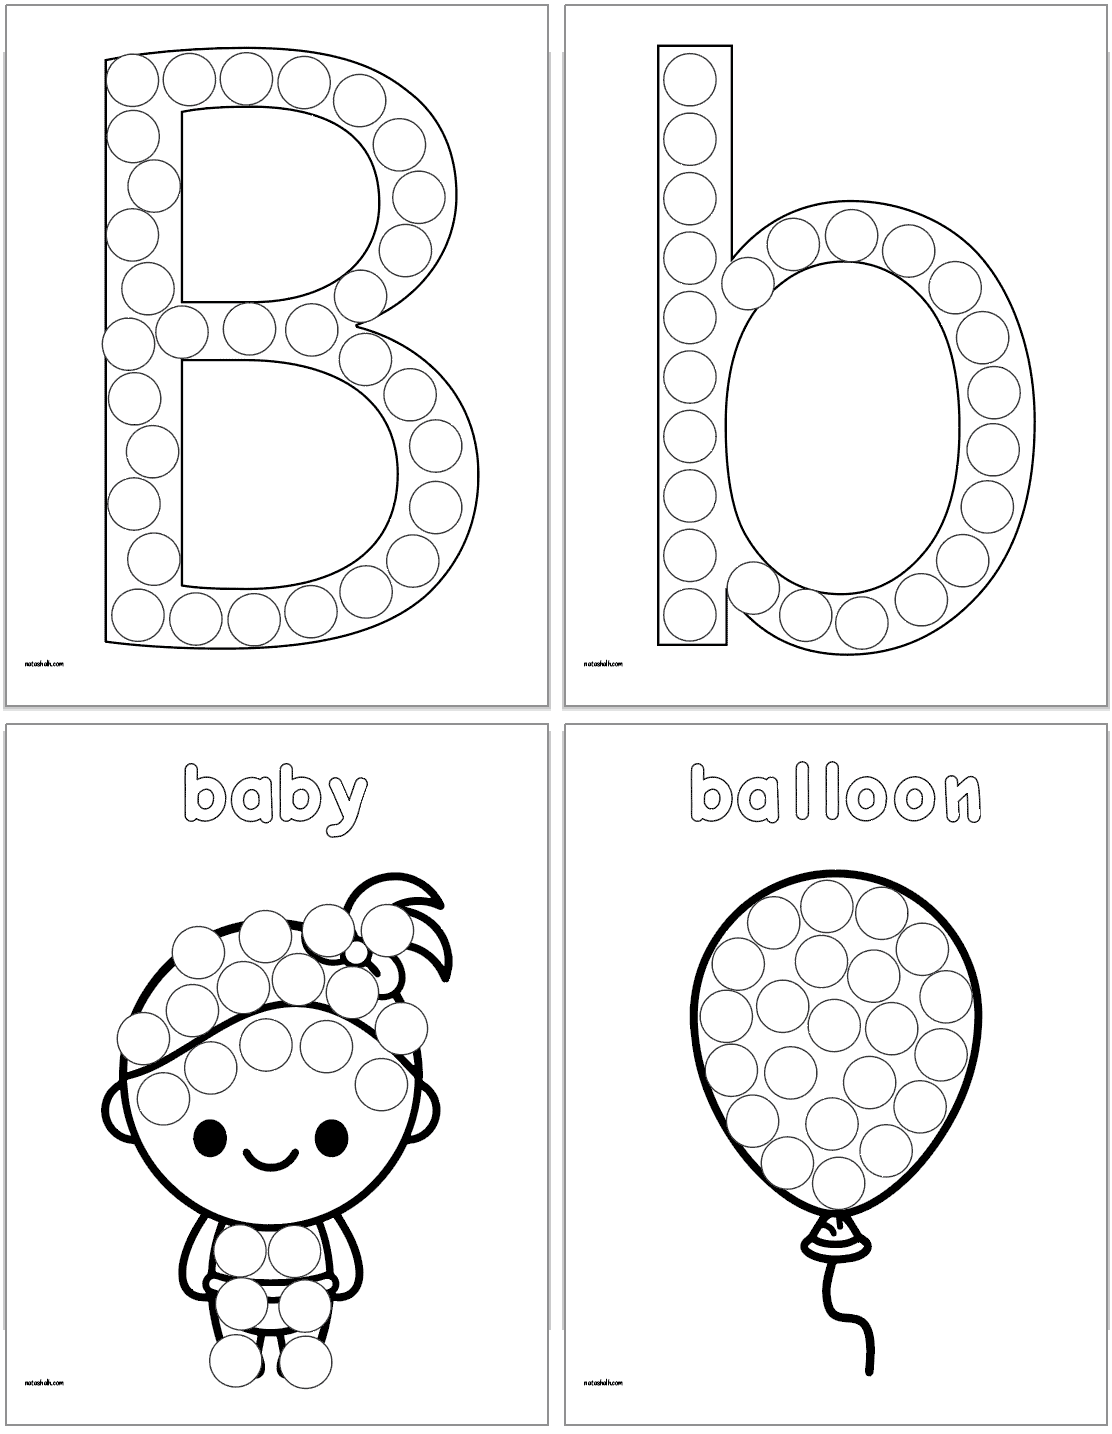 A preview of four letter b themed dot marker pages. They show: uppercase B, lowercase b, a baby, and a balloon